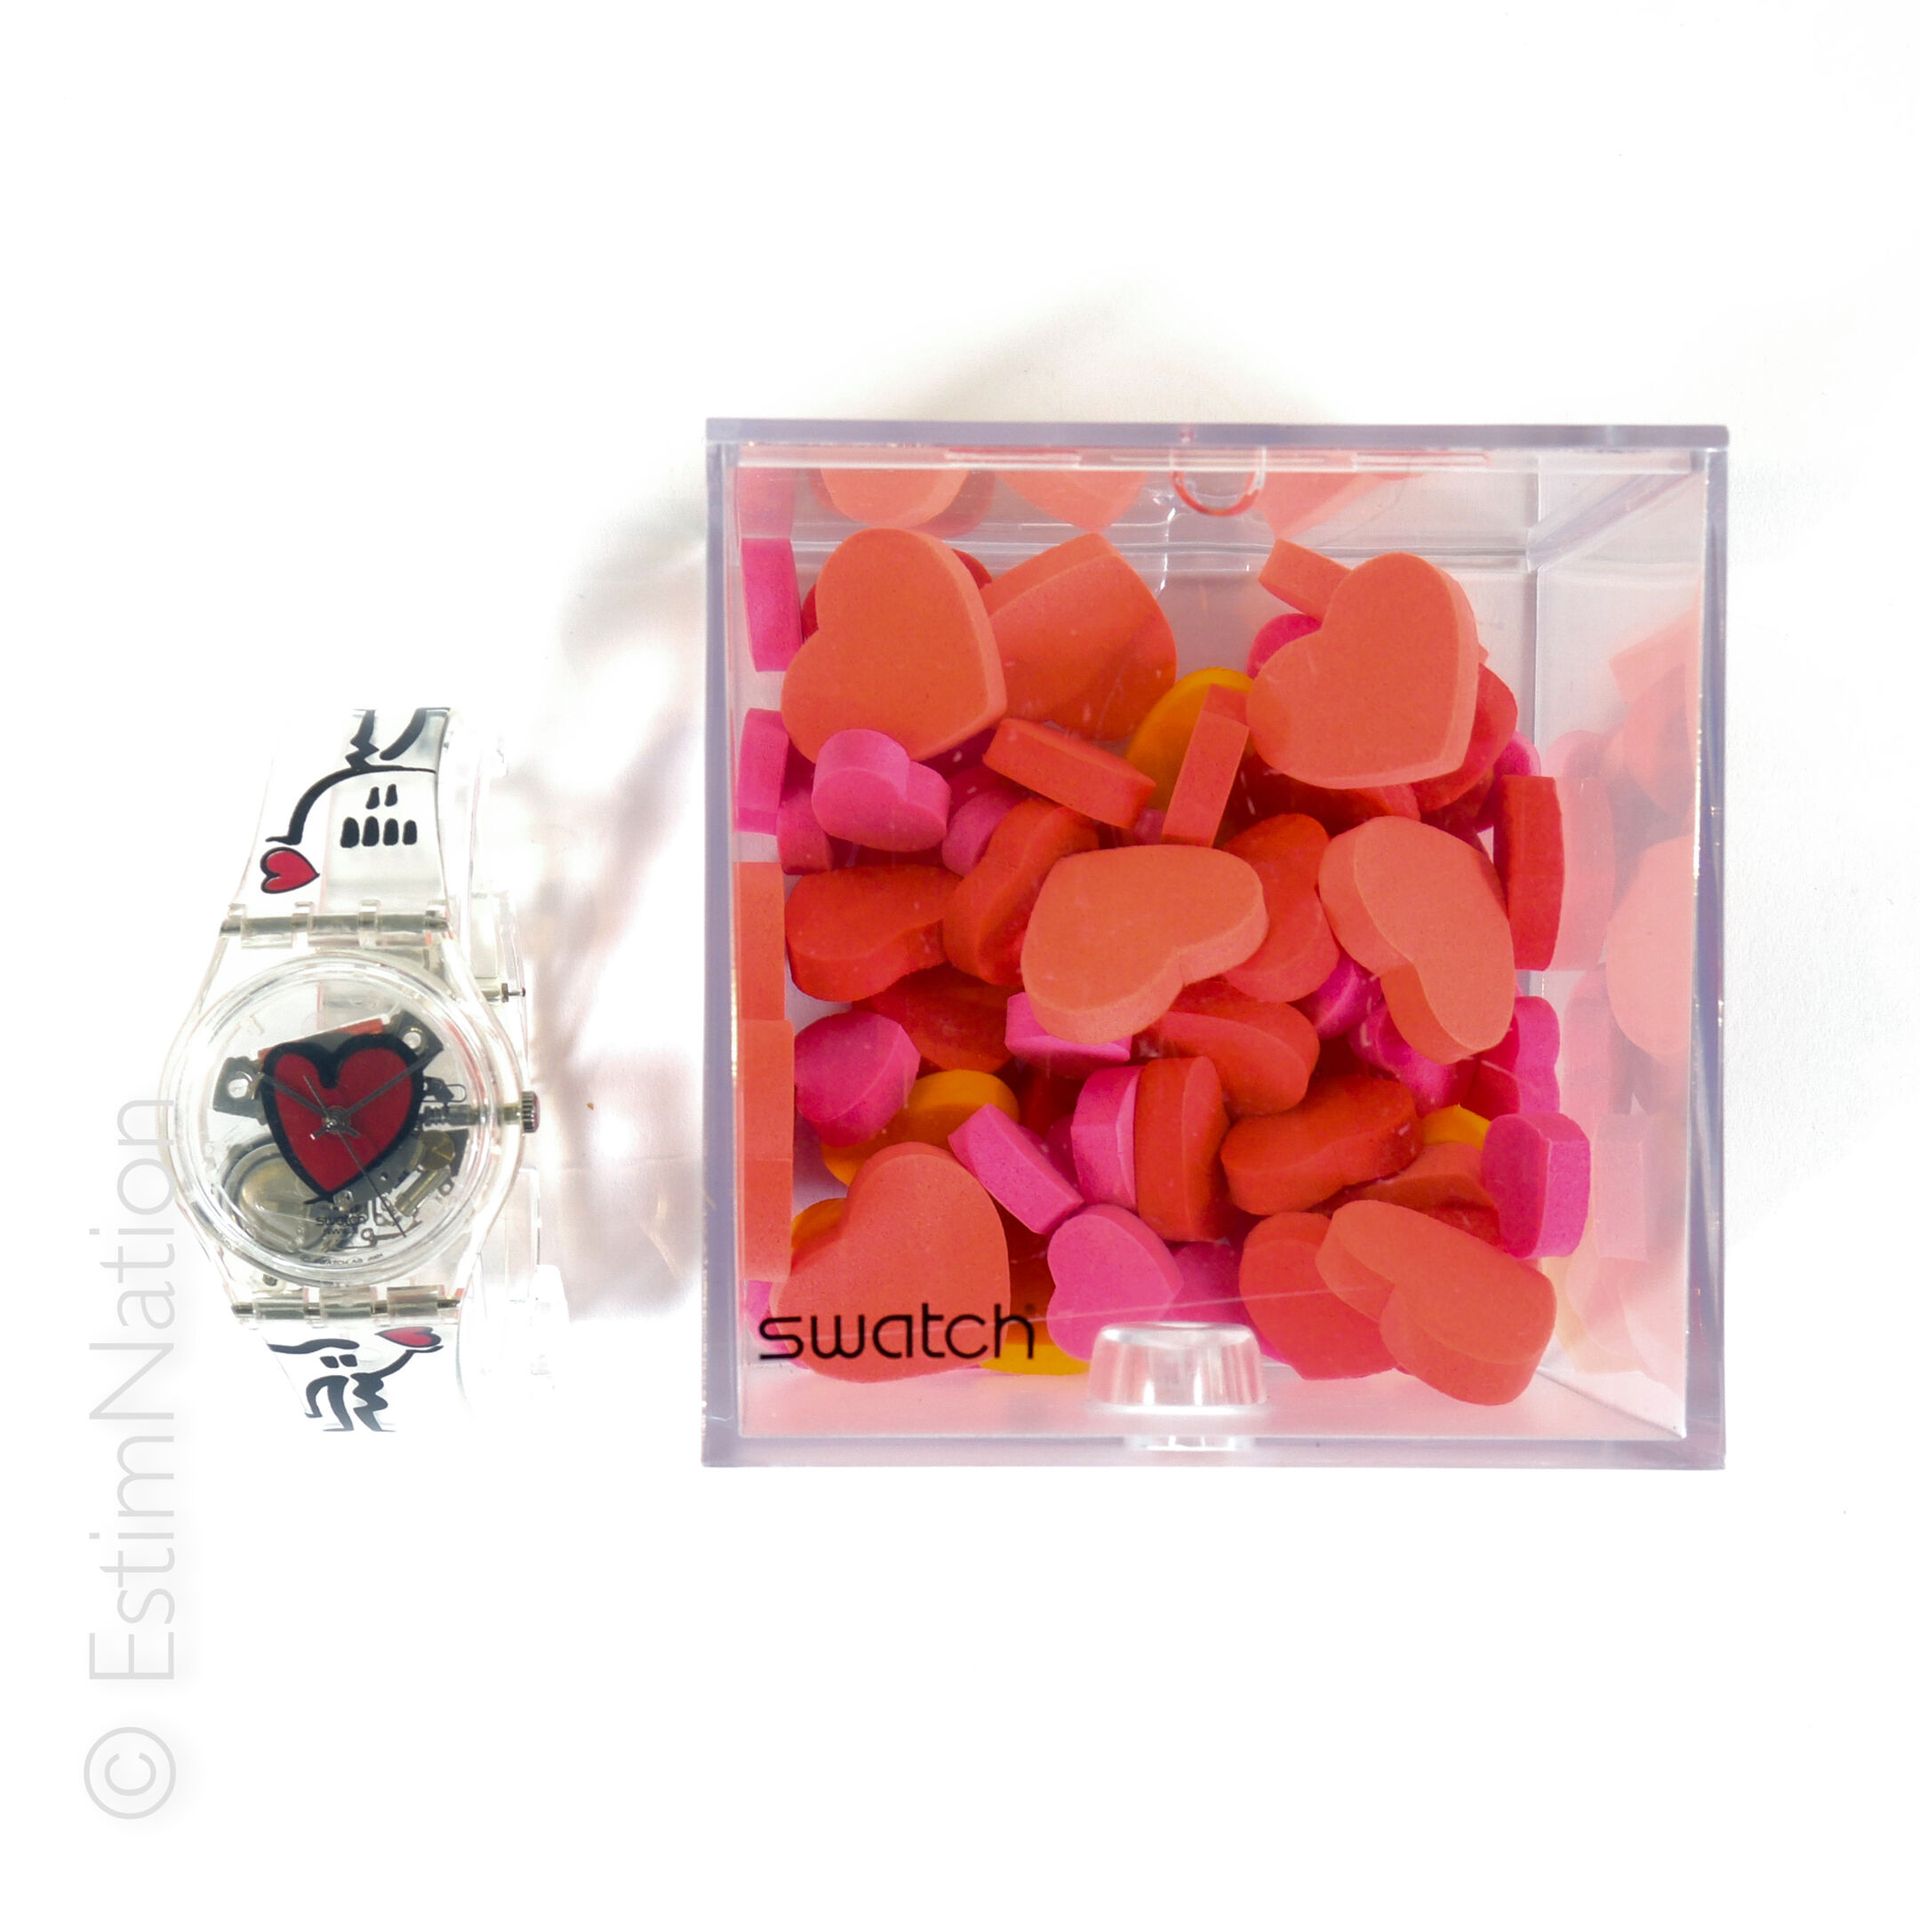 SWATCH - CUPID'S BOW - 2000 SWATCH - CUPID'S BOW

The Originals : Gent



Coffre&hellip;